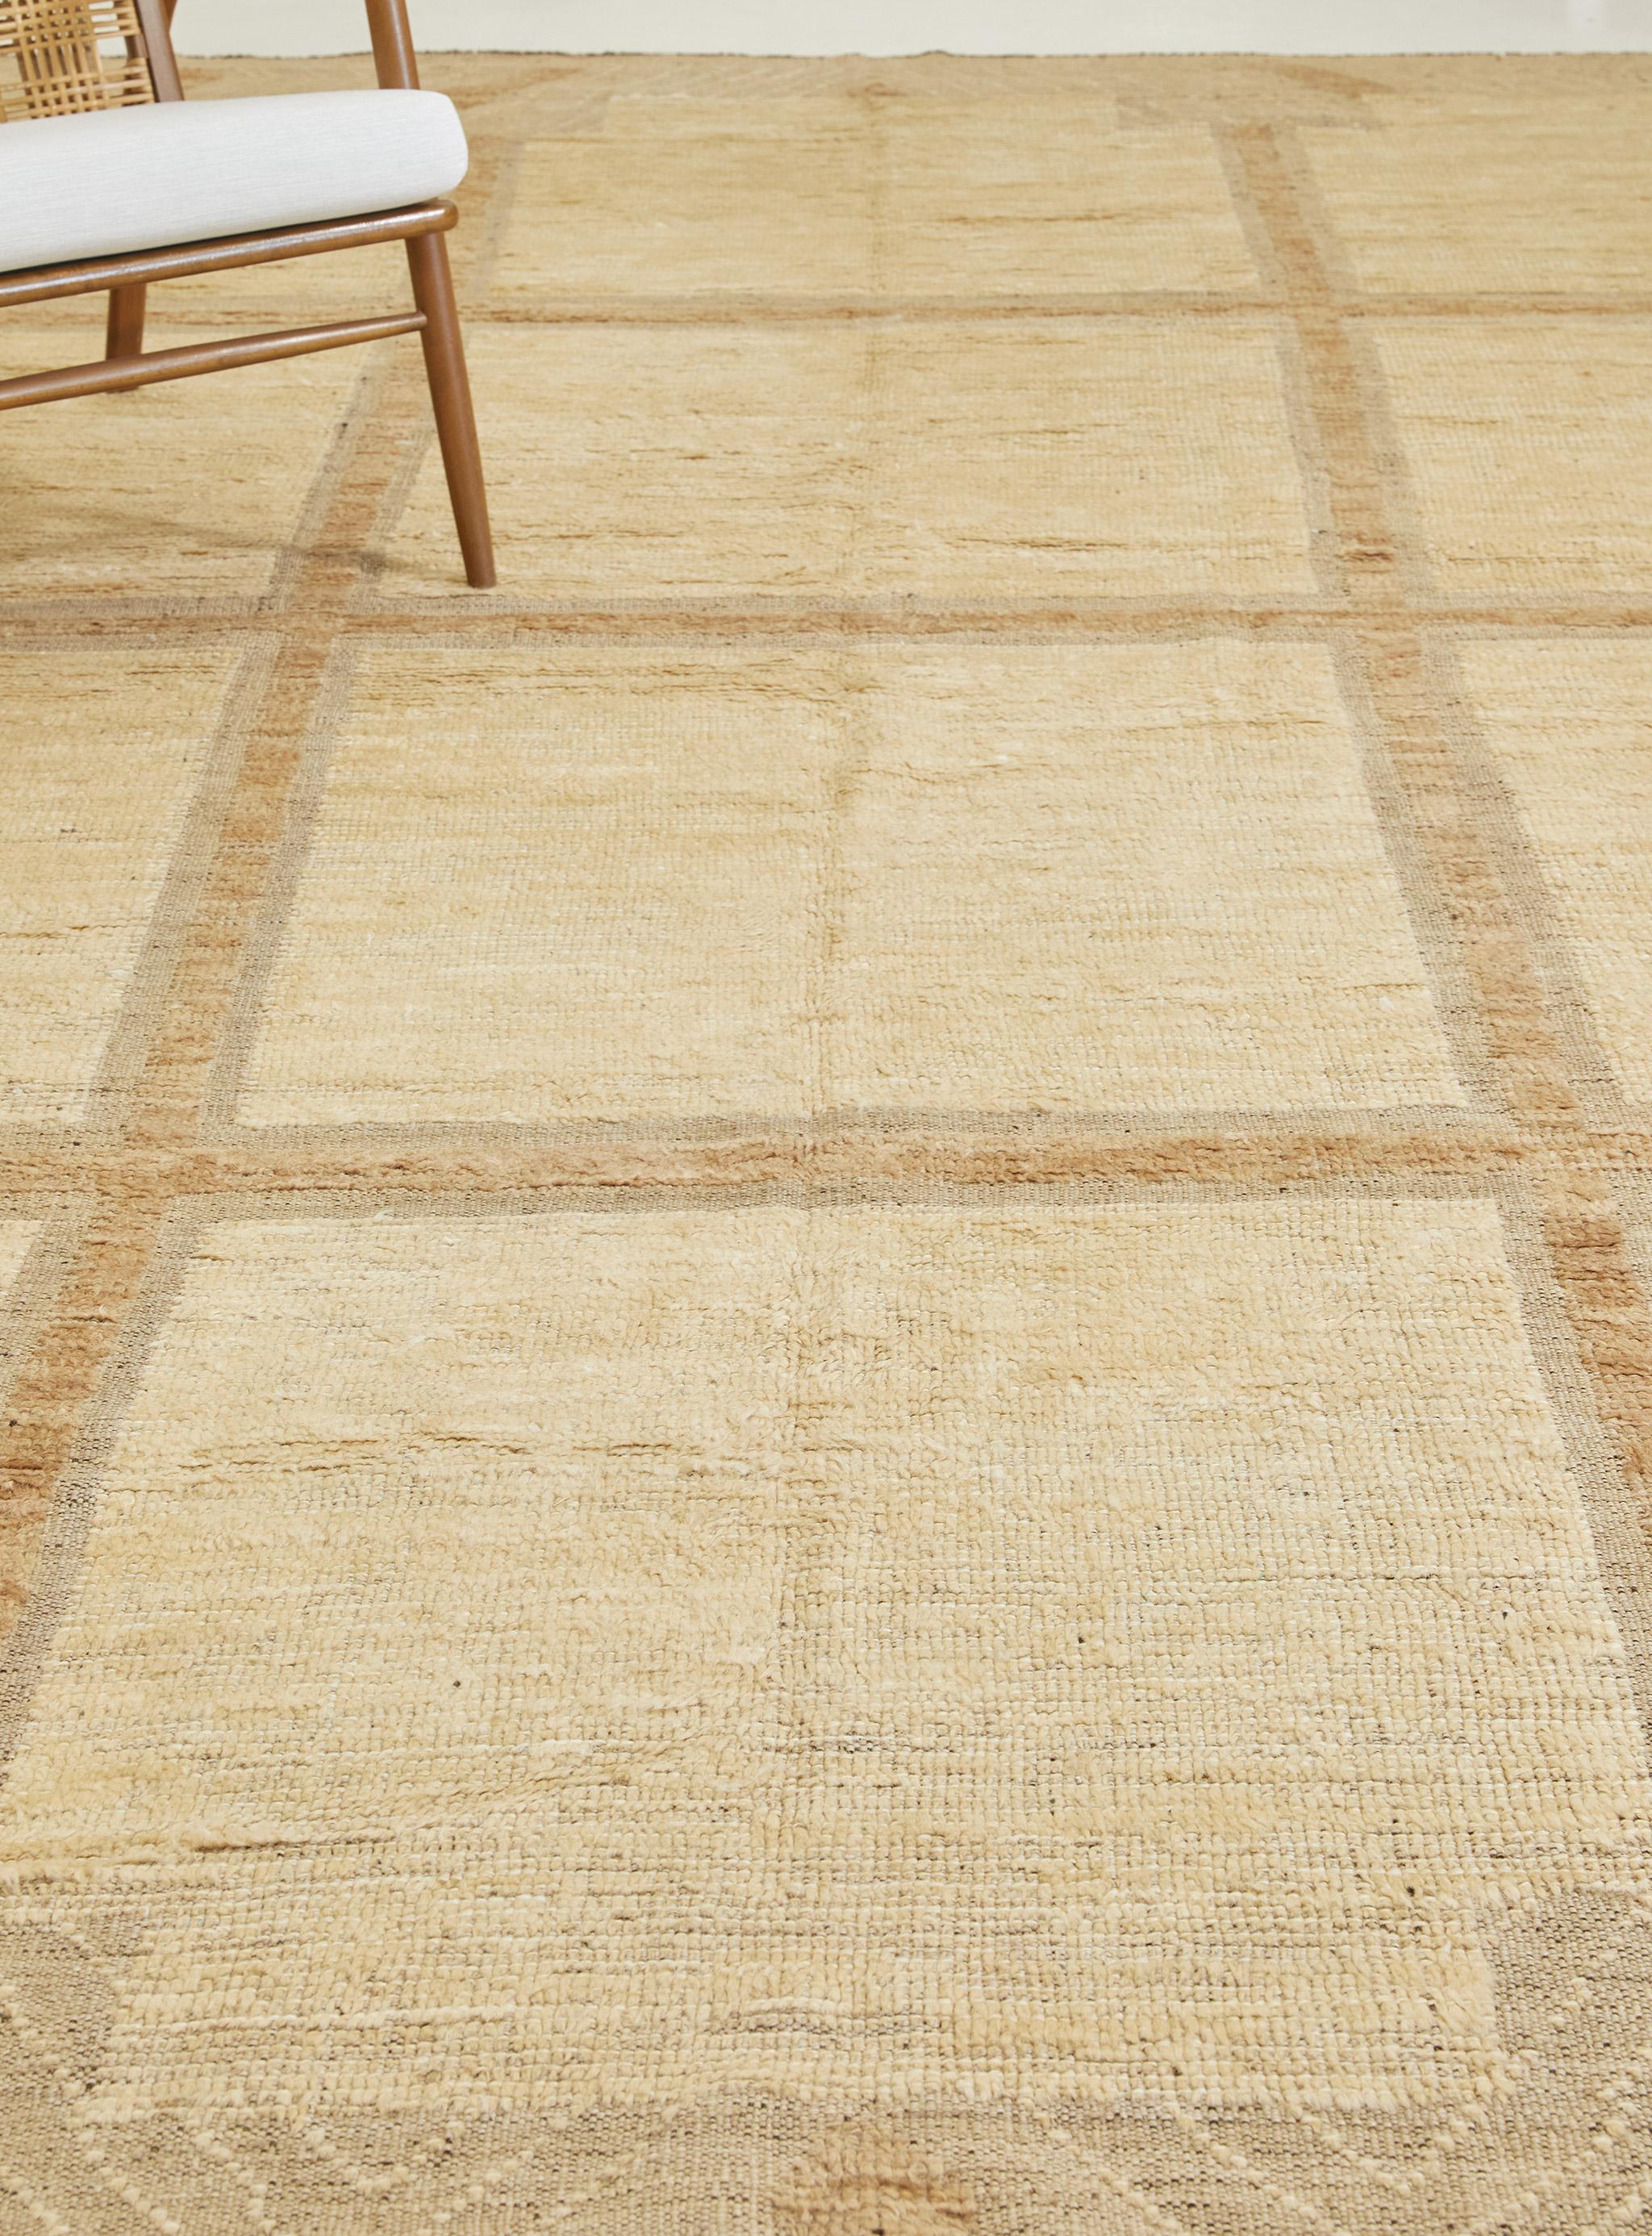 Talasin’ in Nomad Collection features geometric pieces overlaid in a field of thin lozenges. Boasting its earthy shades of tan and buff, this fascinating rug will perfectly blend to your m minimalist interiors. Classy and full of allure, this rug